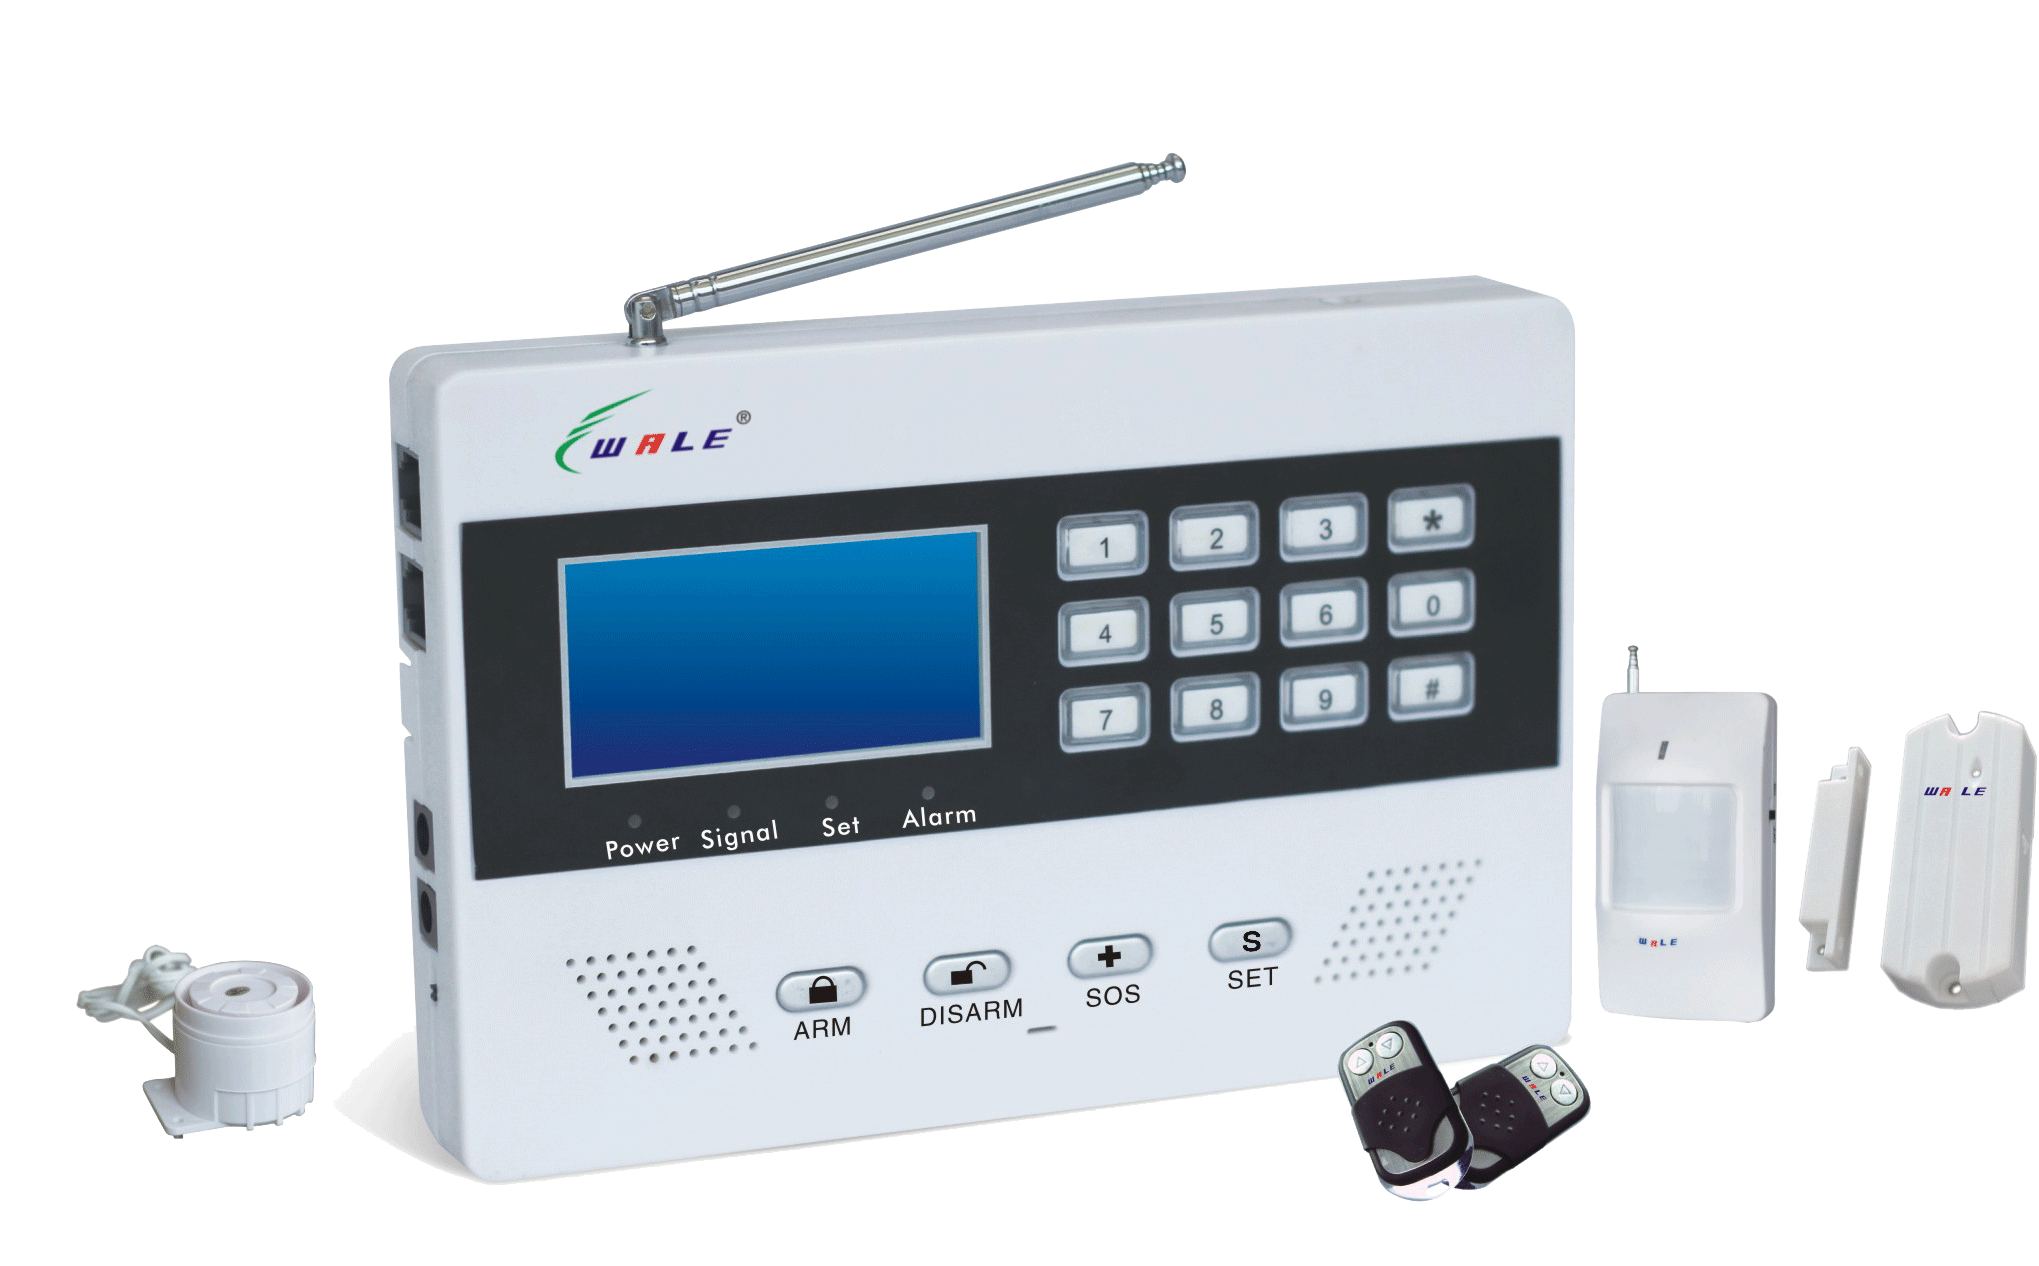 NEW - Wireless GSM Alarm System with LCD Display